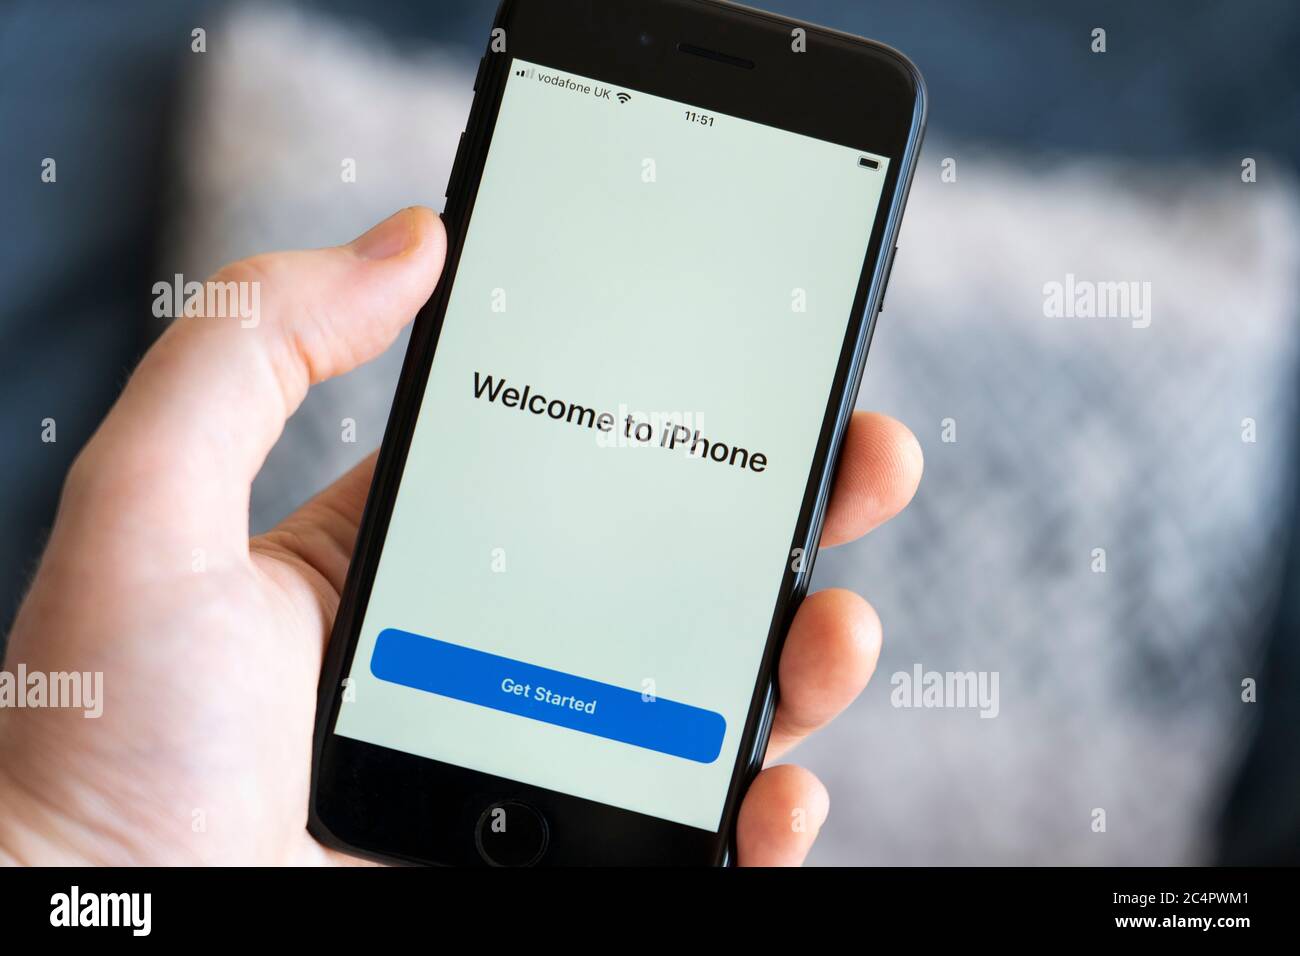 A man's hand holding an iPhone 7 cell phone showing a closeup of the start 'Welcome to iPhone' screen with a 'Get Started' introduction button, UK Stock Photo